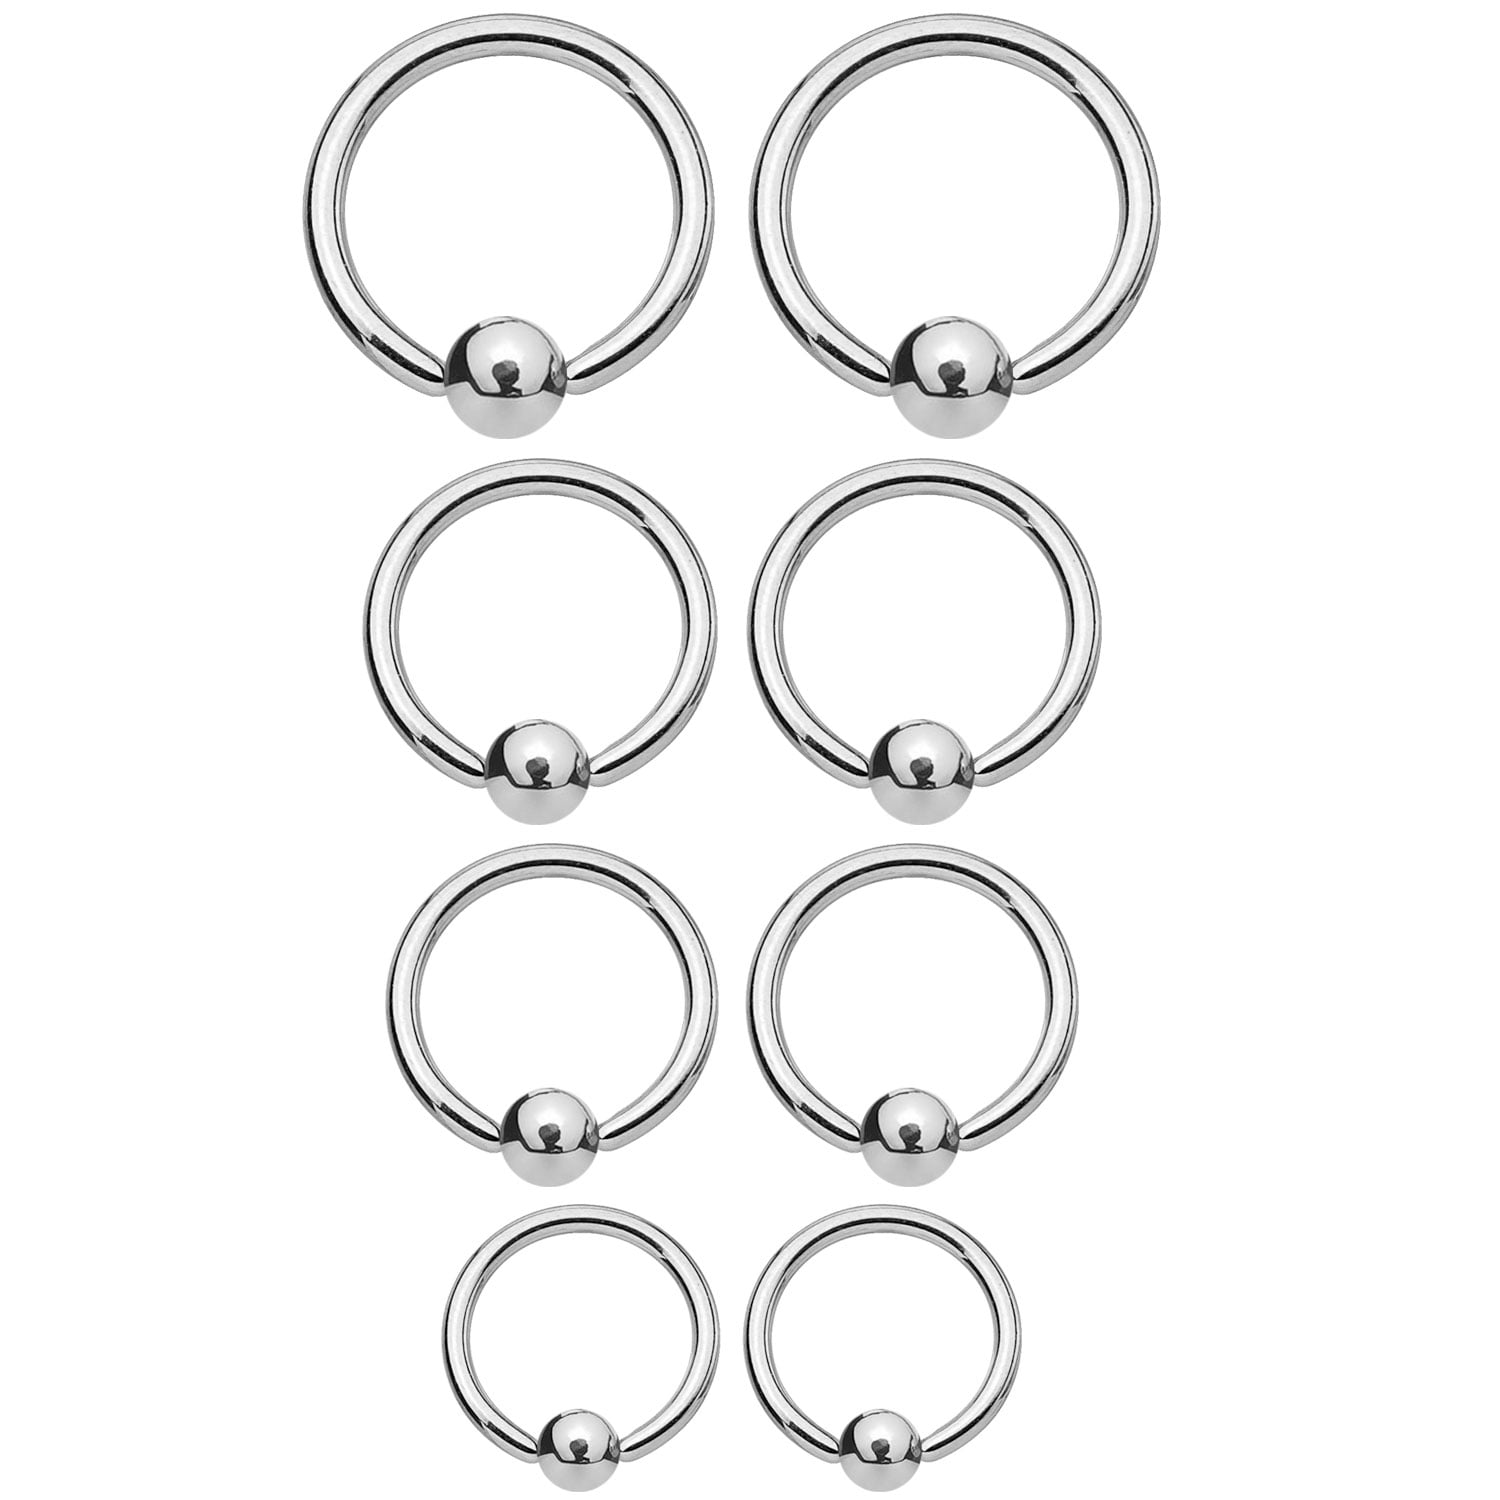 16G Surgical Stainless Multi-functional Lip\Nose\Nipple\Eyebrown Captive Hoop Ring Barbell Tragus Cartilage Stud Earrings 3mm Ball 8mm